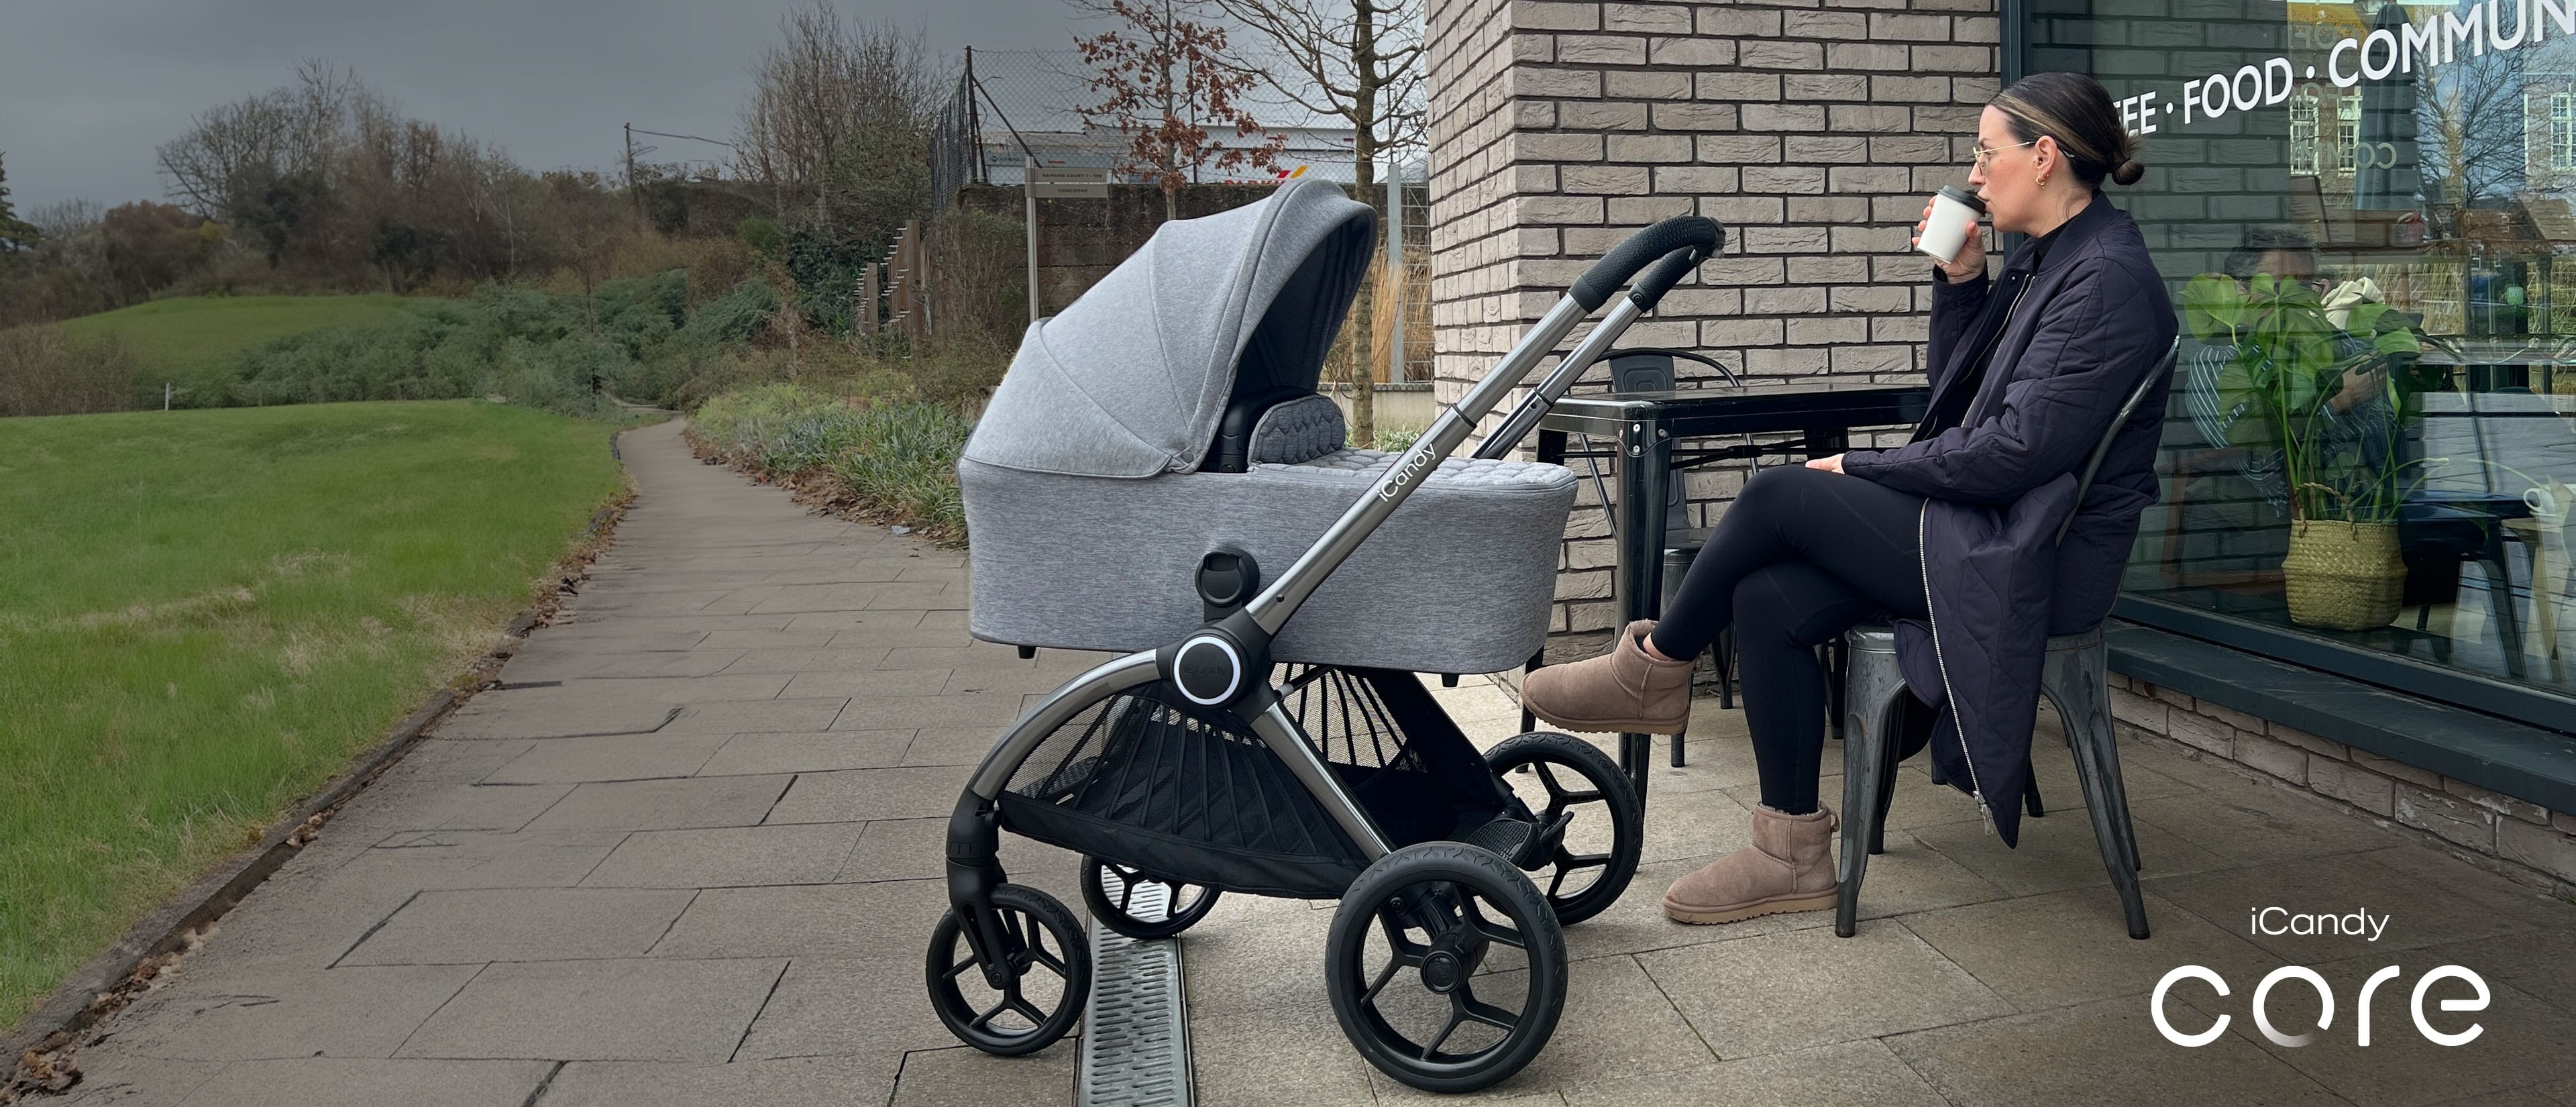 A Guide to Preparing your iCandy Pushchair for Winter Strolls 